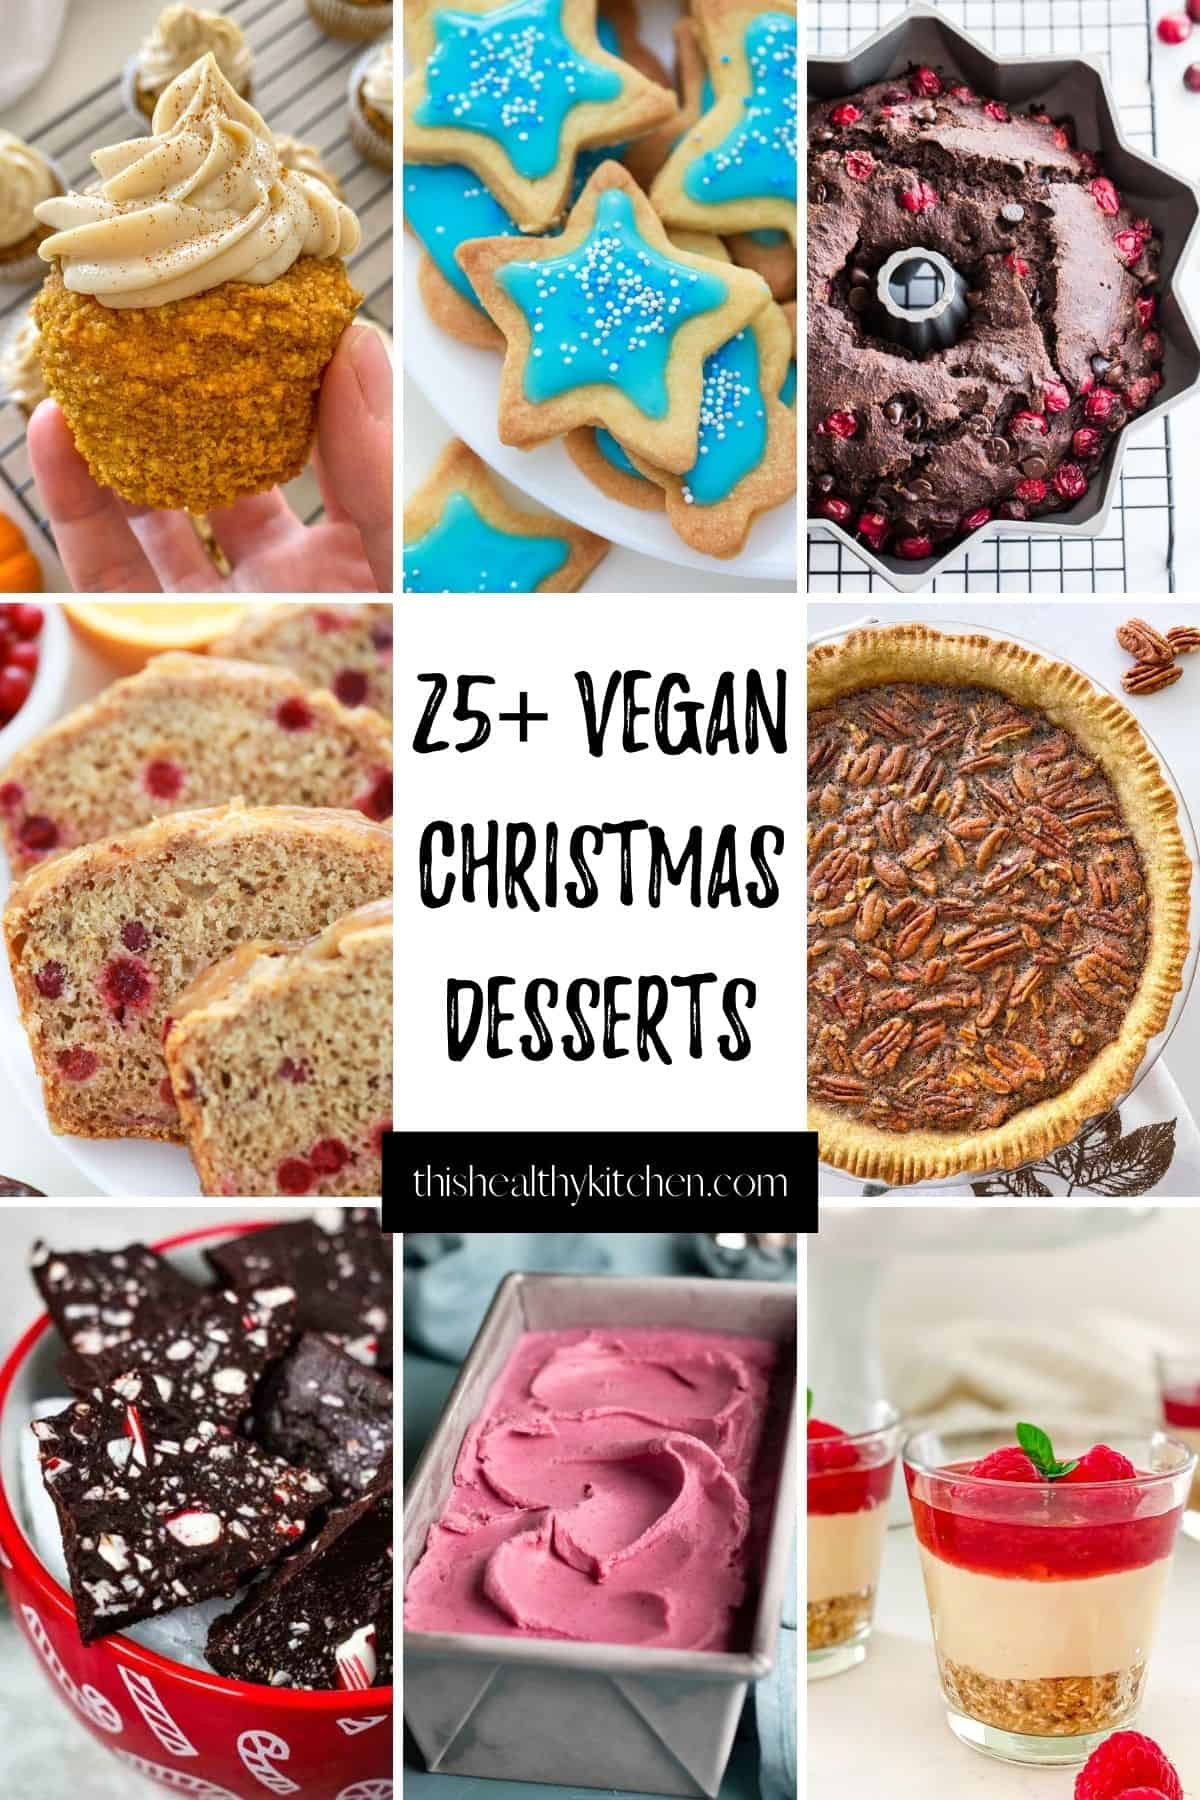 Collage of 8 Christmas desserts.